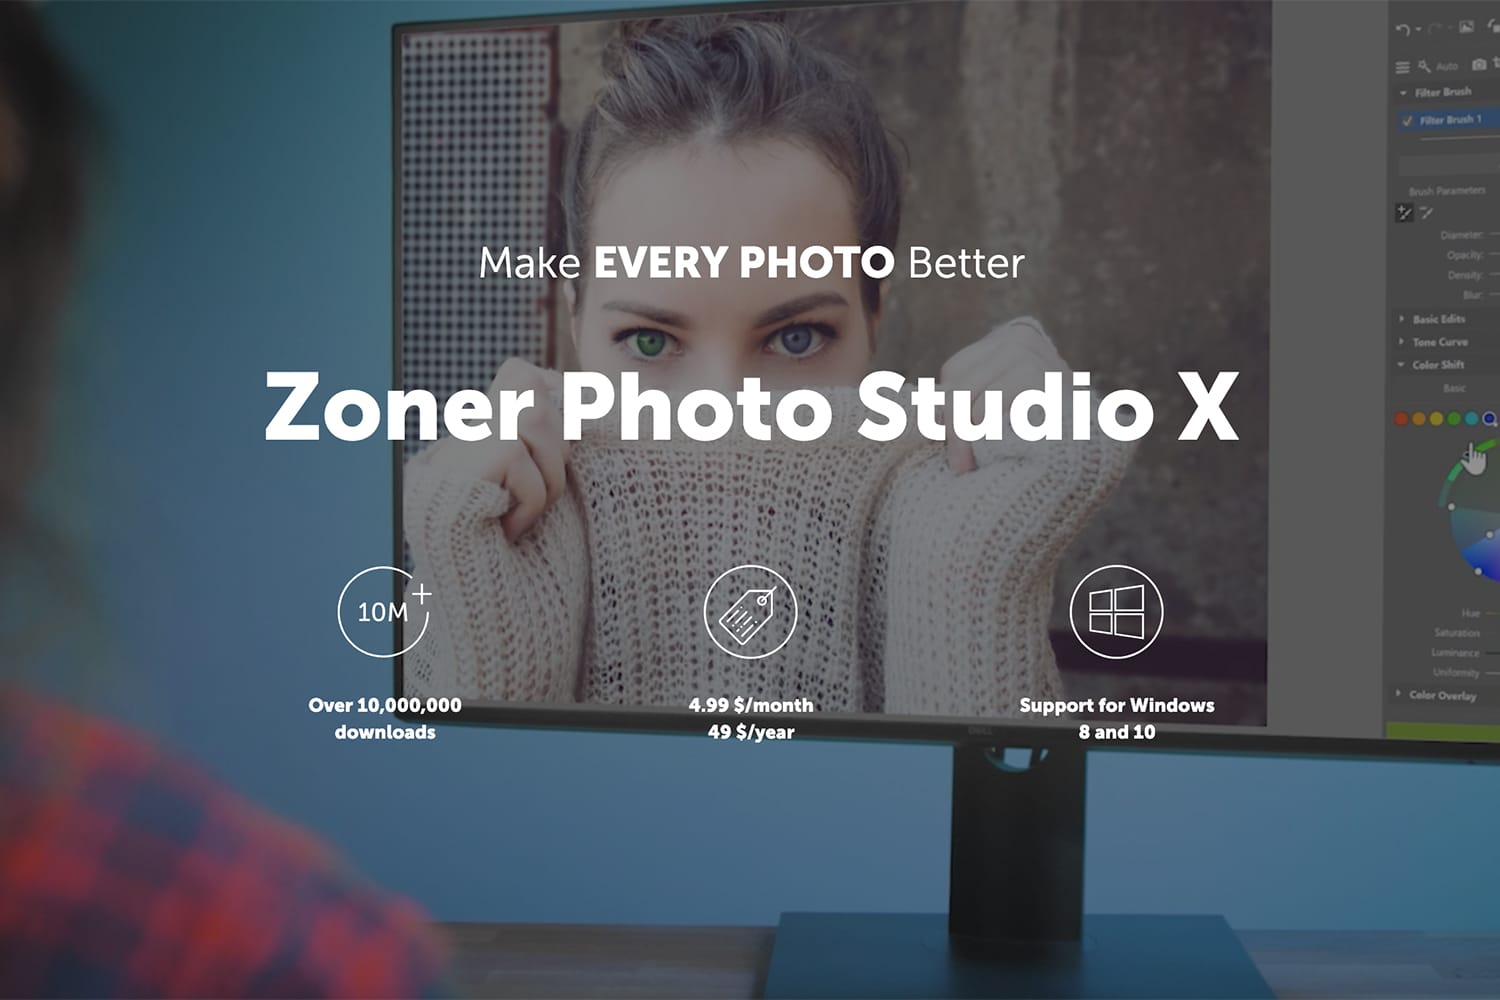 Zoner Photo Studio X 19.2309.2.497 download the last version for android